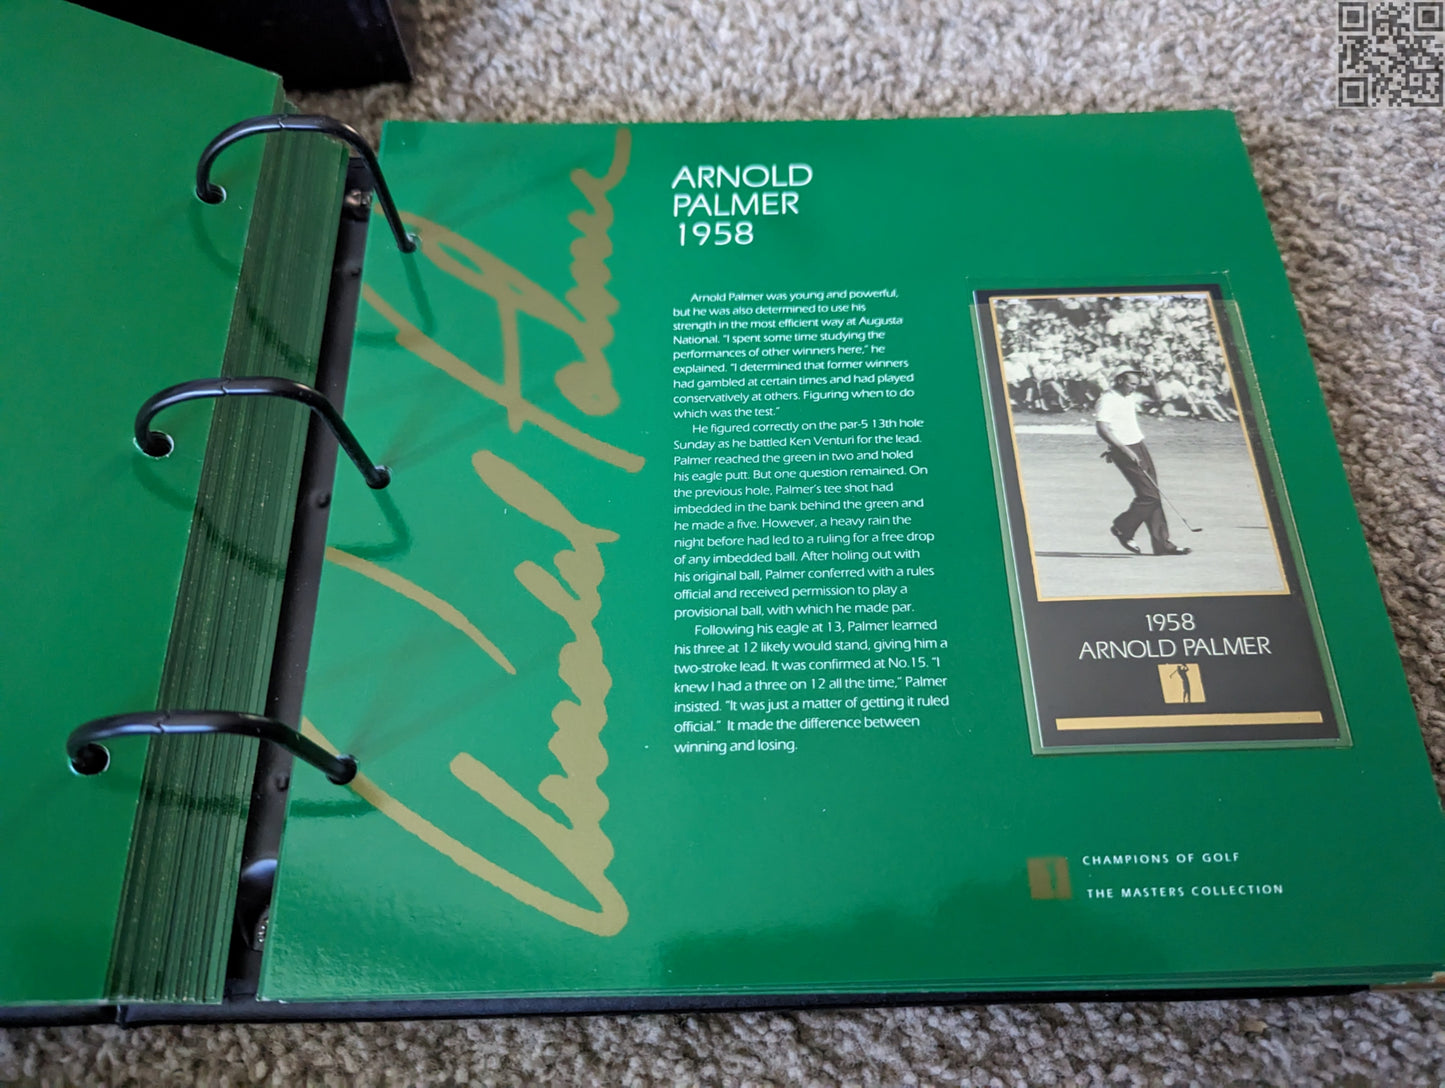 1994 Masters Collection Champions of Golf "Gold Foil" Set in Binder 1